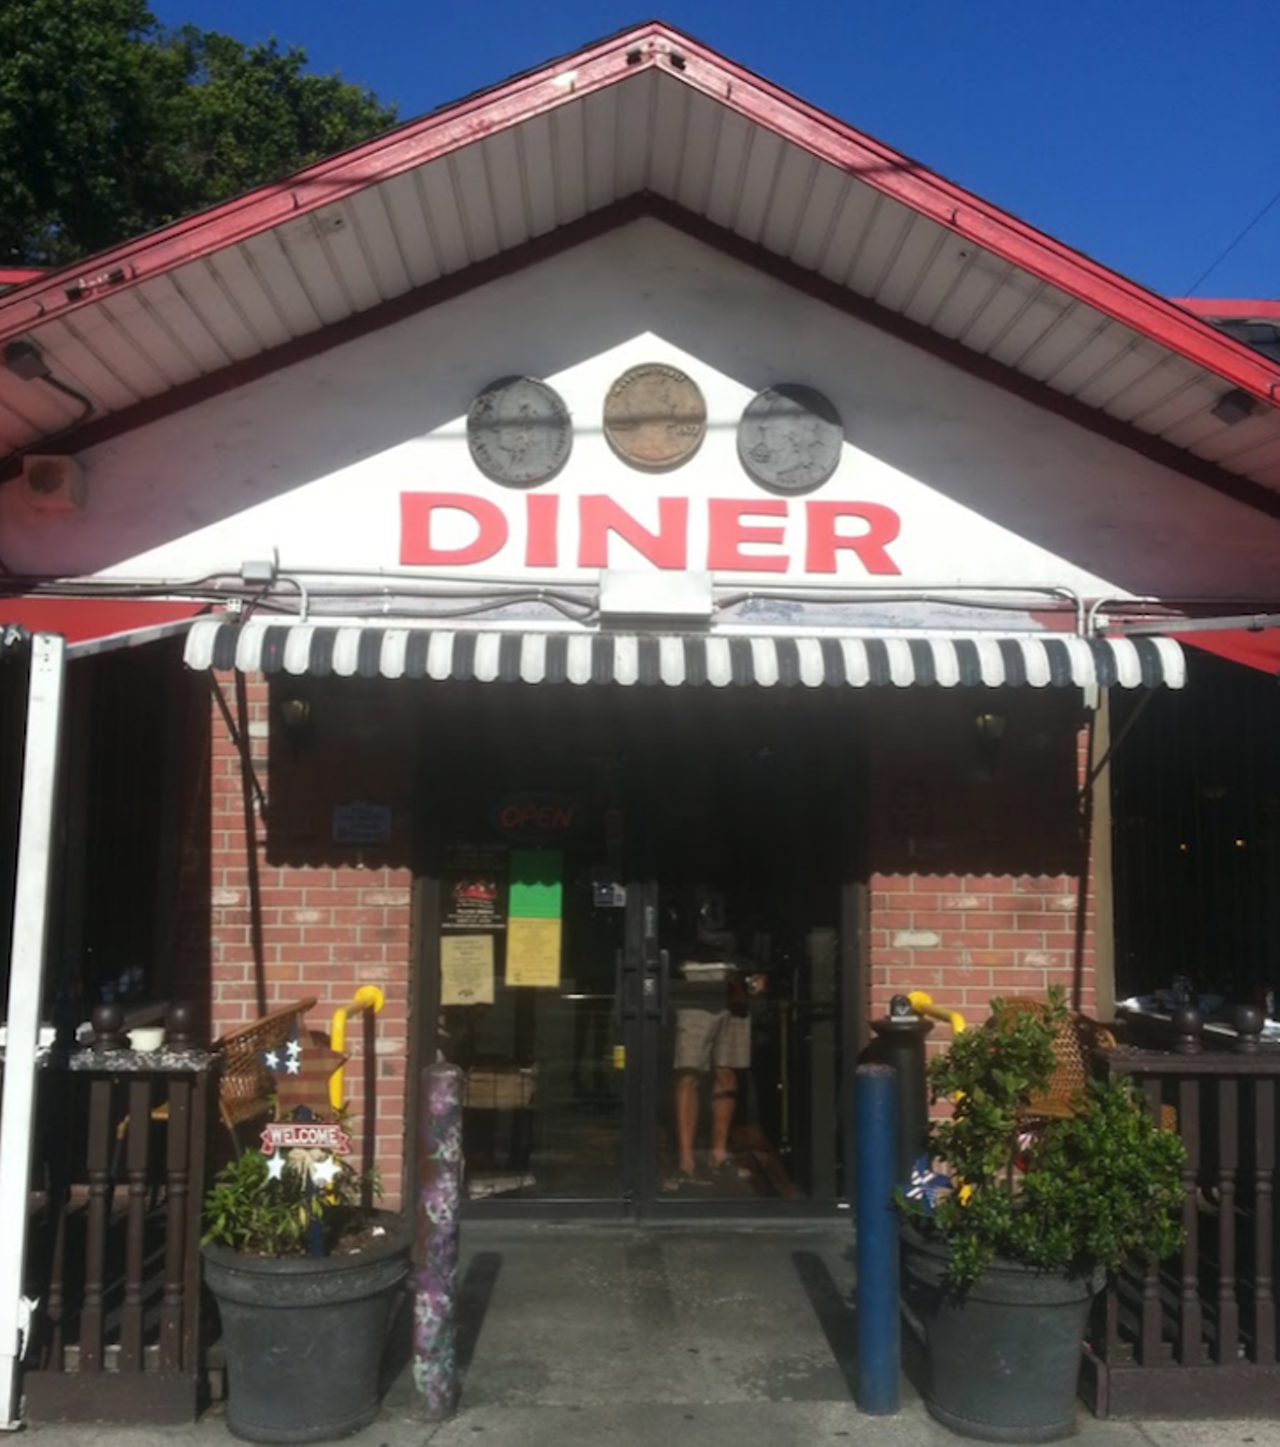 Three Coins  
7410 N Nebraska Ave, Tampa, 813-239-1256
Open 24 hours, Three Coins Diner is a prime spot to binge while tipsy, or for a no frills breakfast. Don&#146;t leave without getting a dessert to go.
Photo via Google Maps